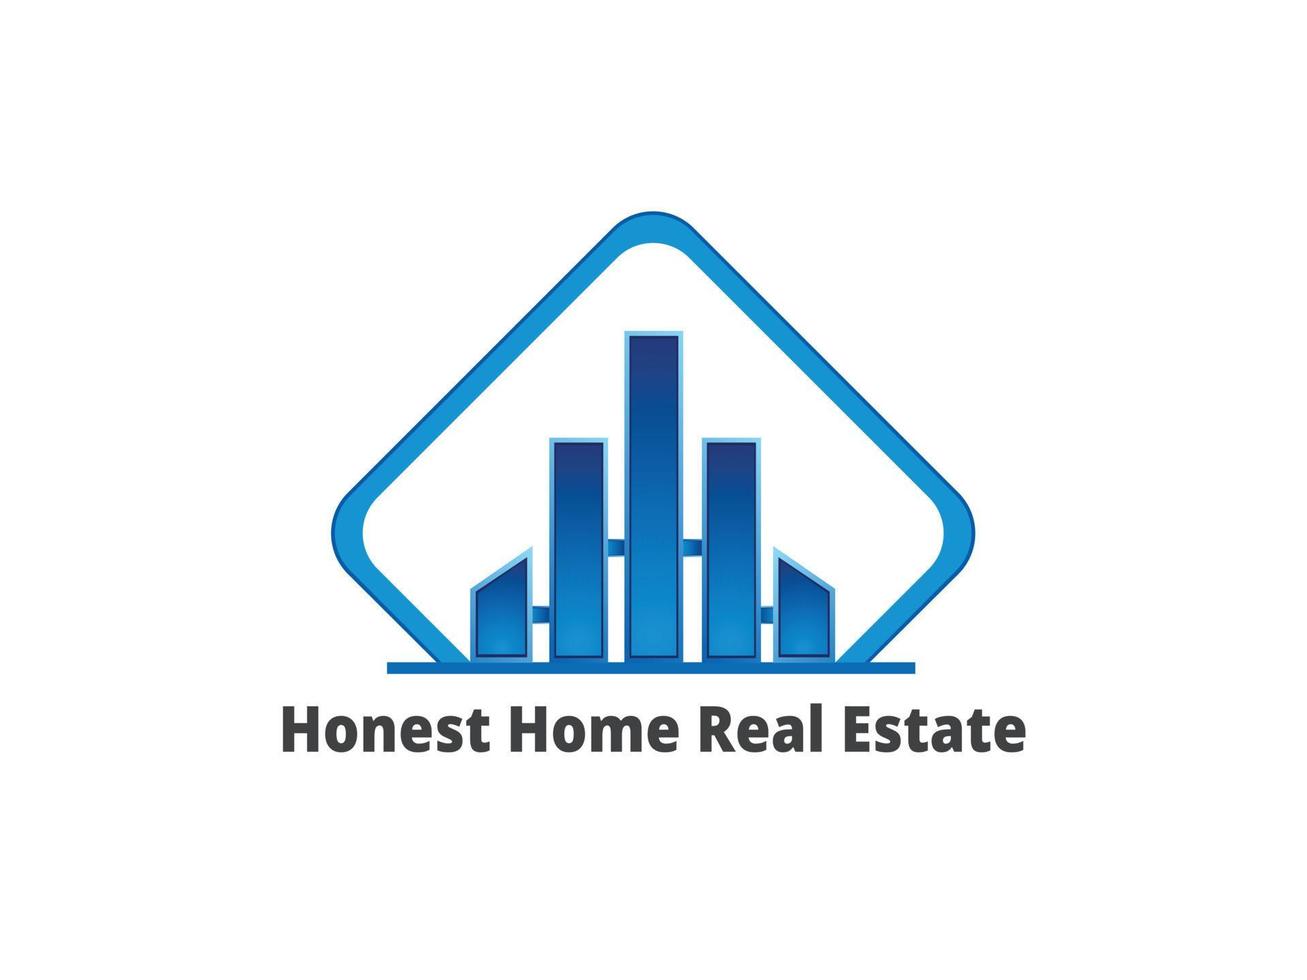 Real estate logo design vector. Honest Home Real Estate for realty and construction agency or company. vector